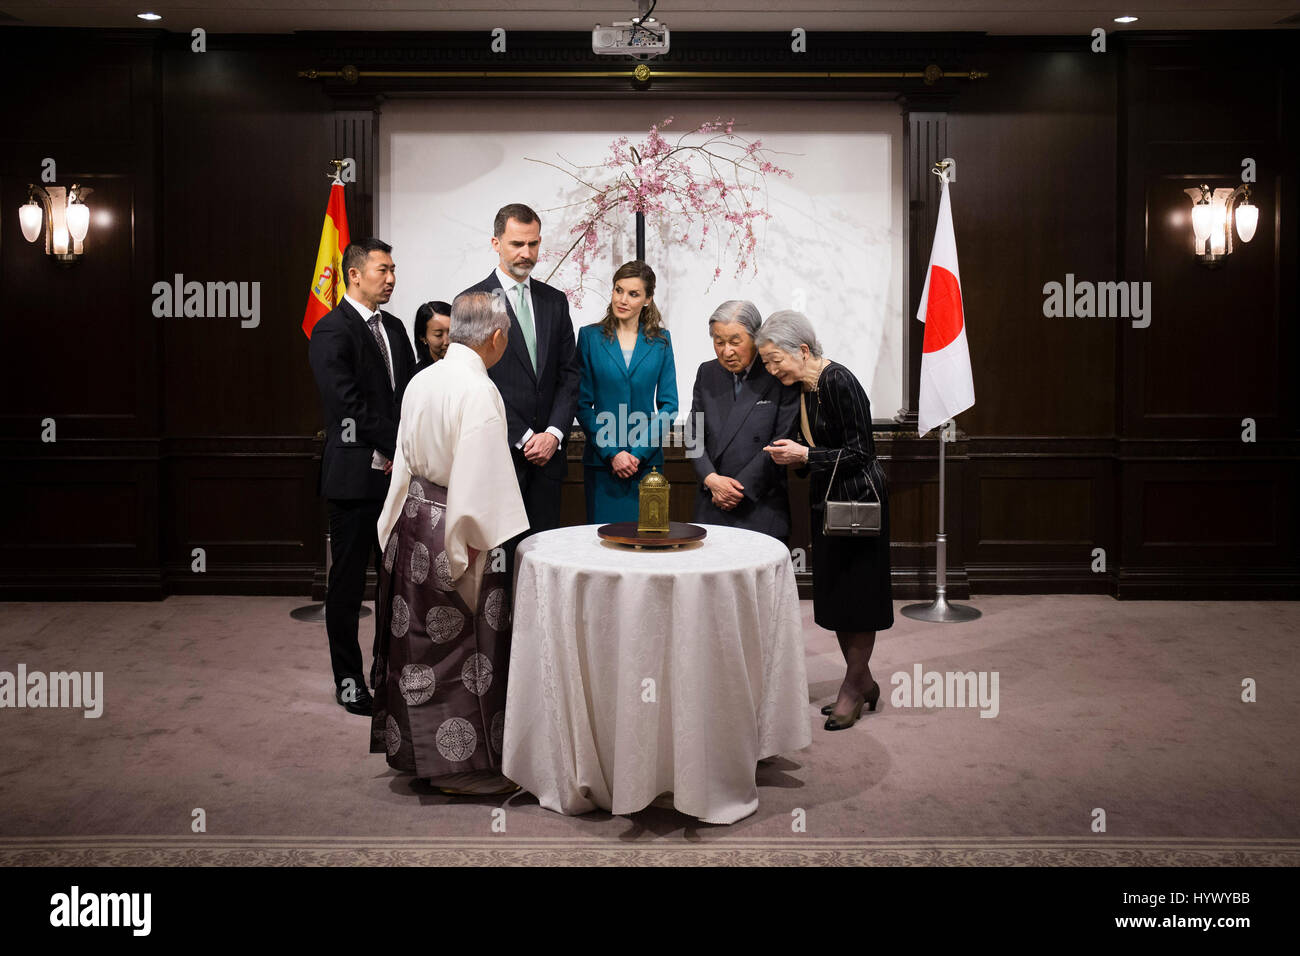 Spanish King Felipe VI and Queen Letizia with Japanese Emperor Akihito and Empress Michiko look at the western clock of Lord Tokugawa Ieyasu in Fugetsuro, former mansion of Lord Tokugawa Yoshinobu, Aoi Ward, Shizuoka Prefecture on April 7, 2017. Credit: Gtres Información más Comuniación on line,S.L./Alamy Live News Stock Photo